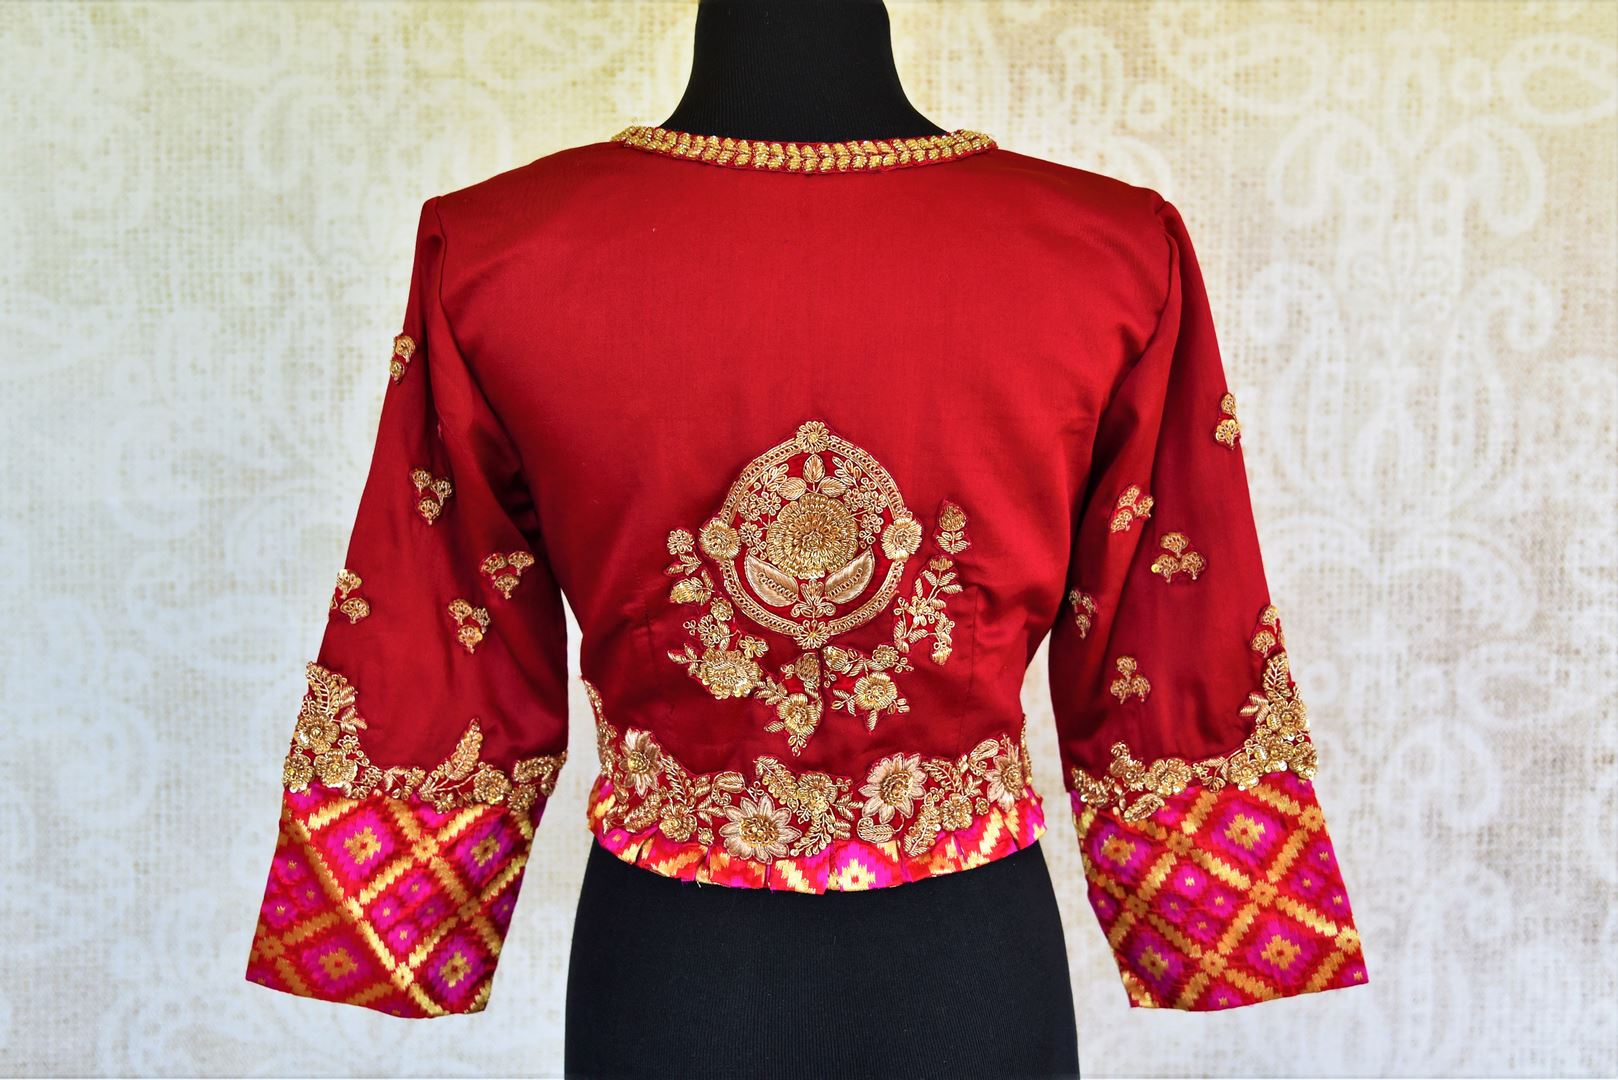 Buy beautiful red embroidered silk blouse online from Pure Elegance. Our Indian fashion store in USA brings a stunning range of readymade saree blouses for women.-back